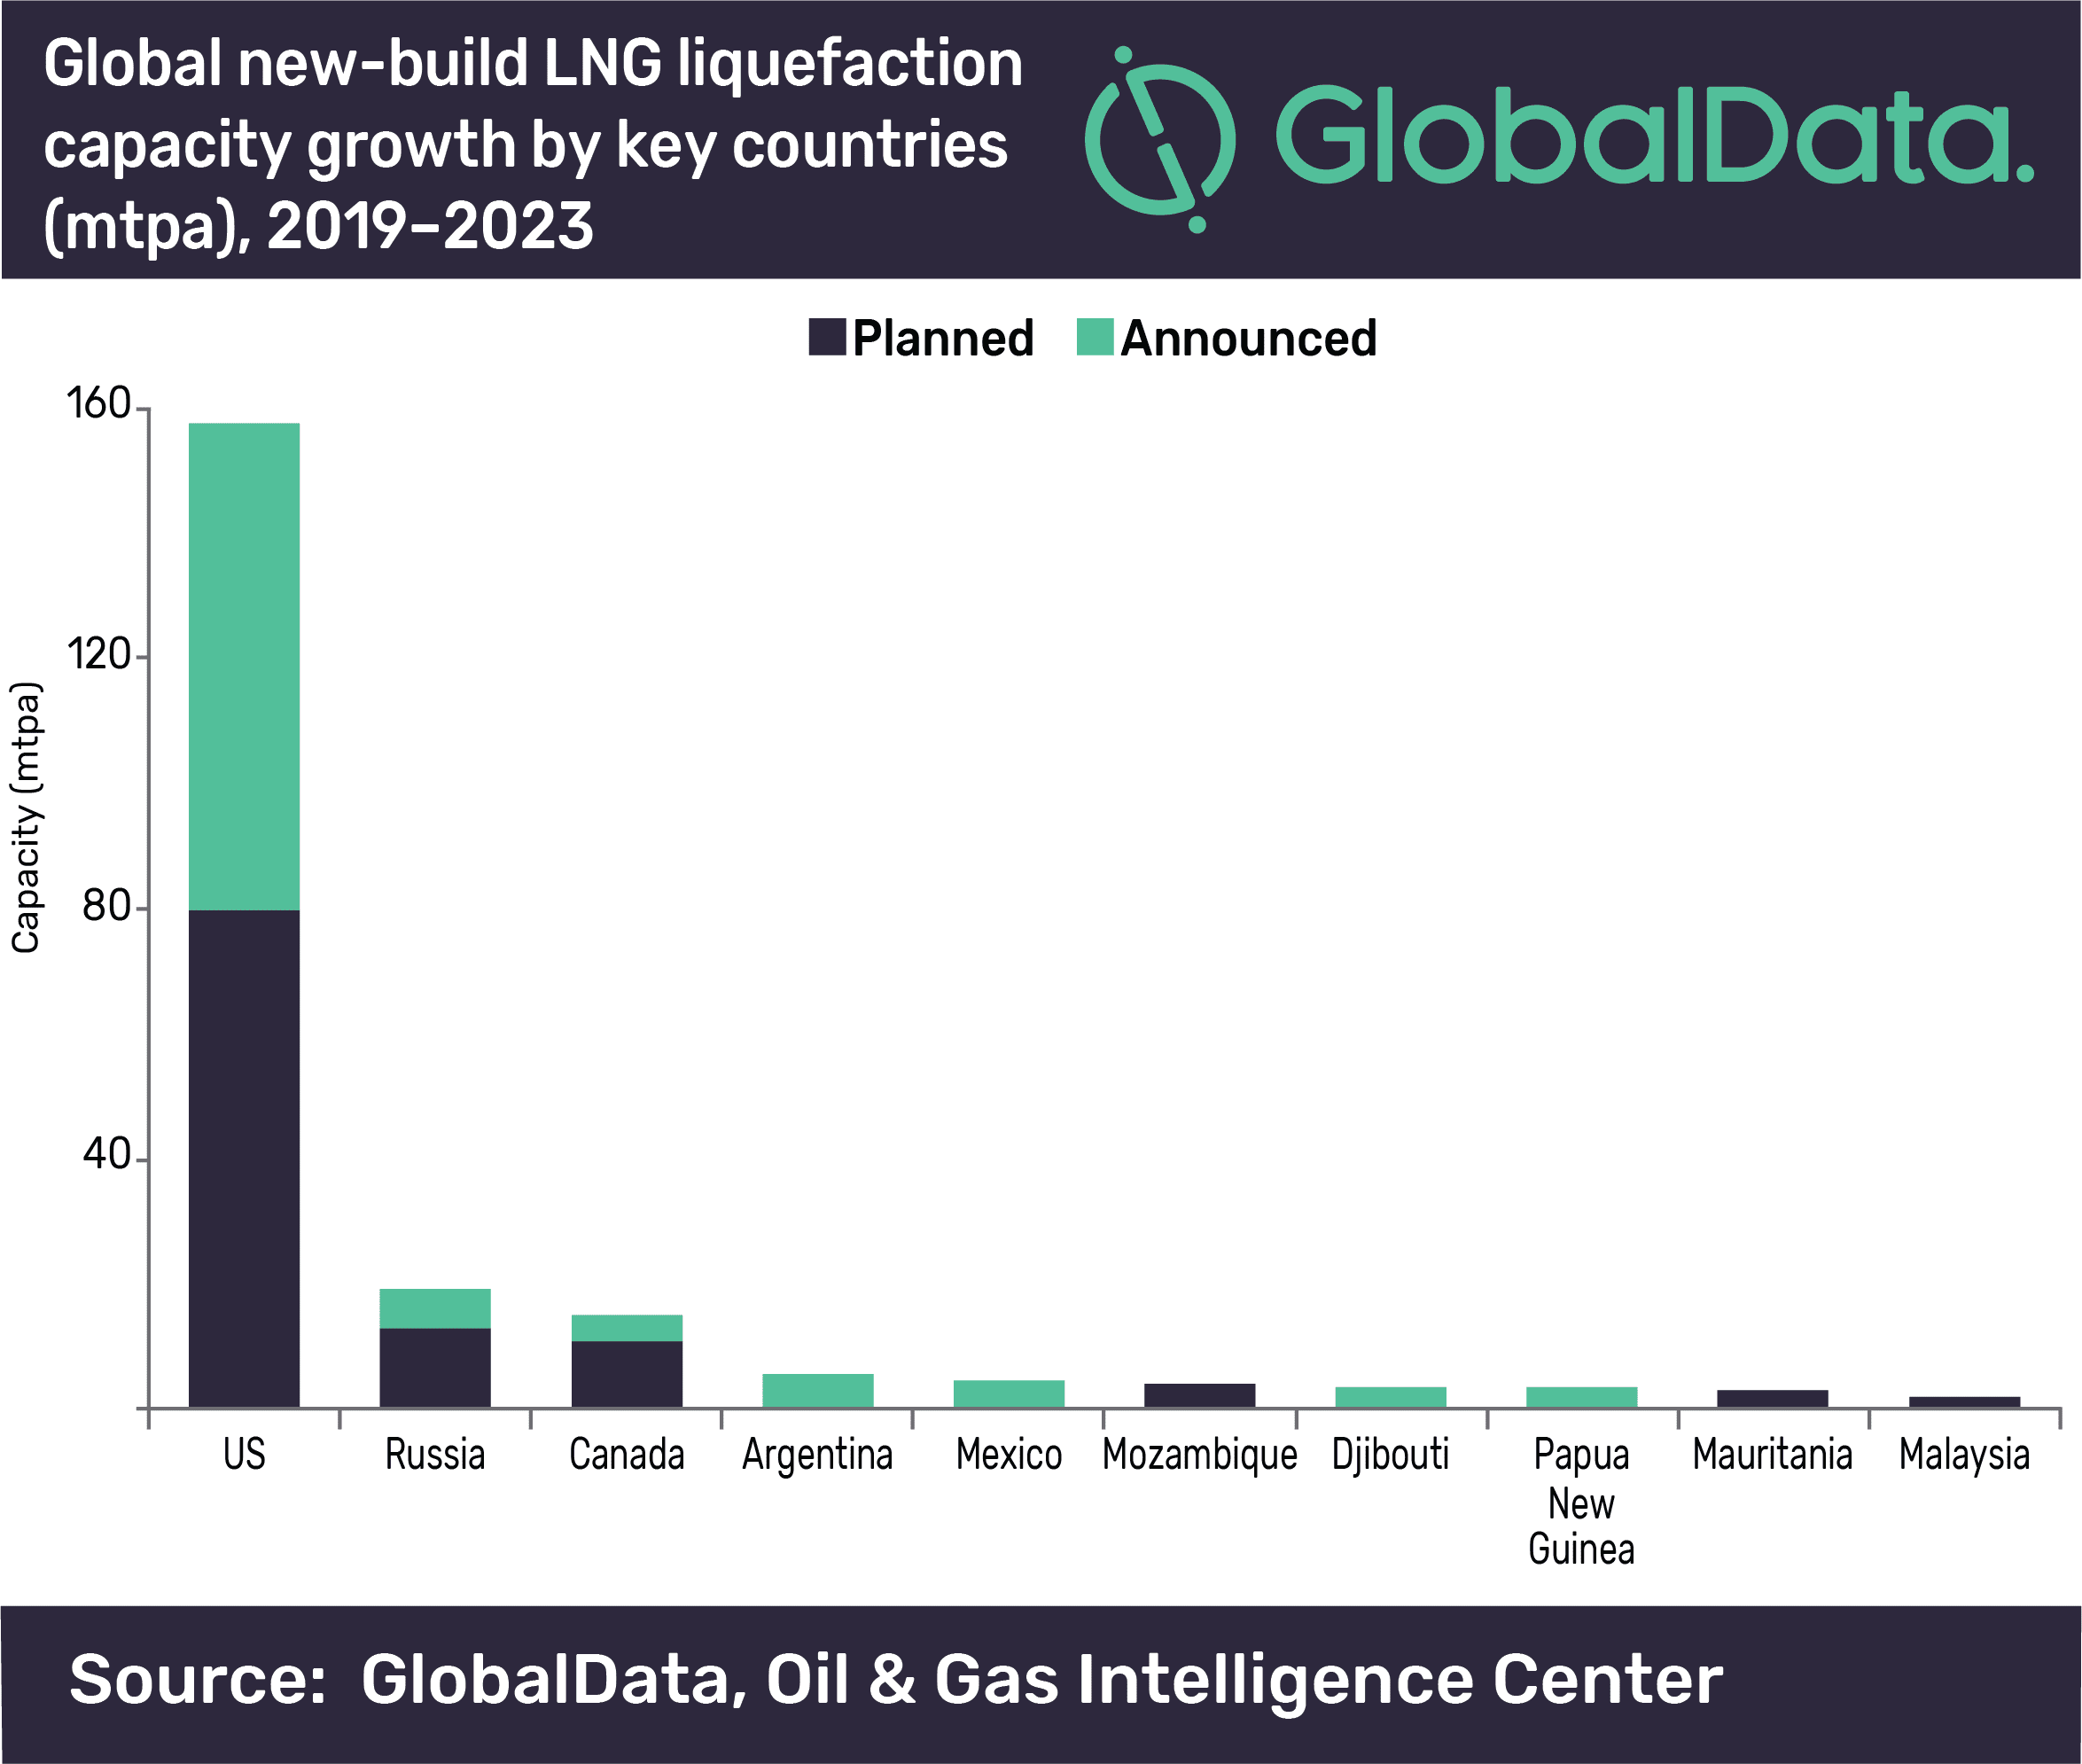 US will contribute 73% of global LNG liquefaction capacity growth by 2023